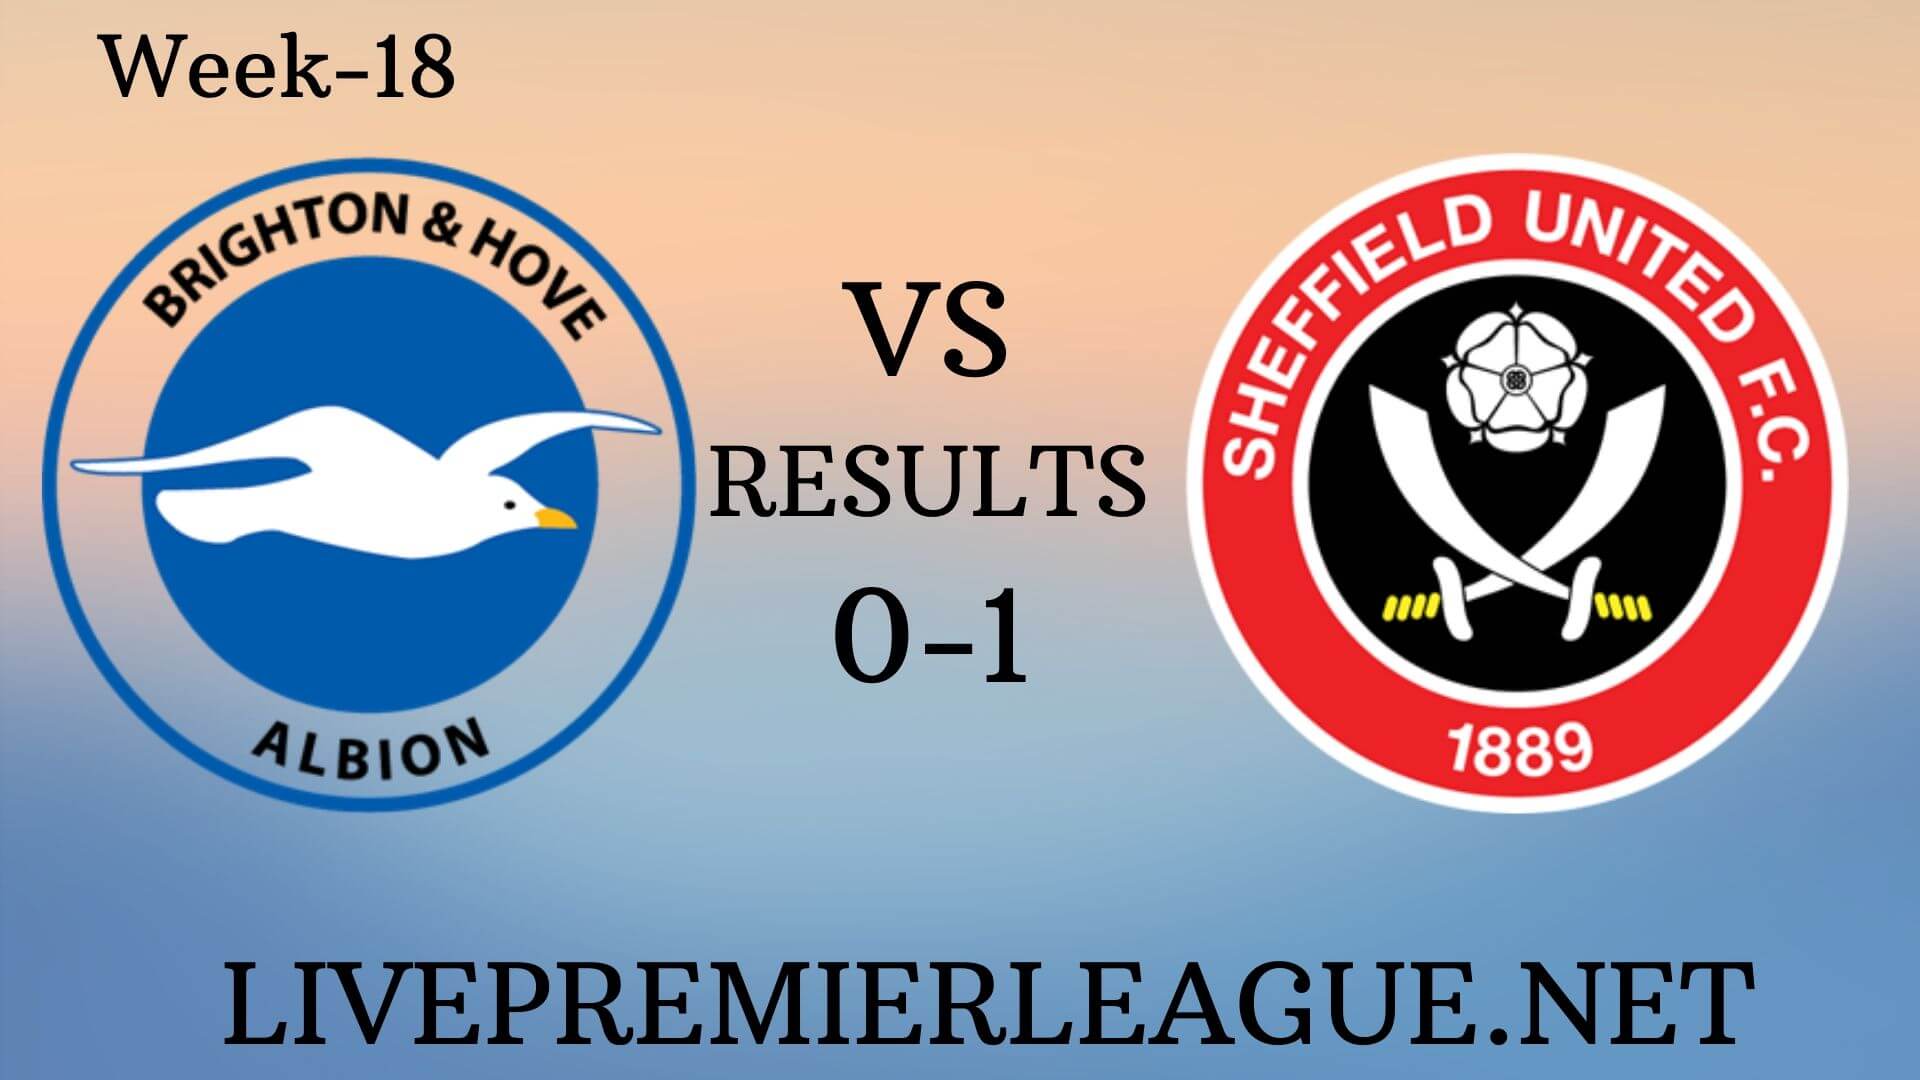 Brighton and Hove Albion vs Sheffield United | Week 18 Results 2019